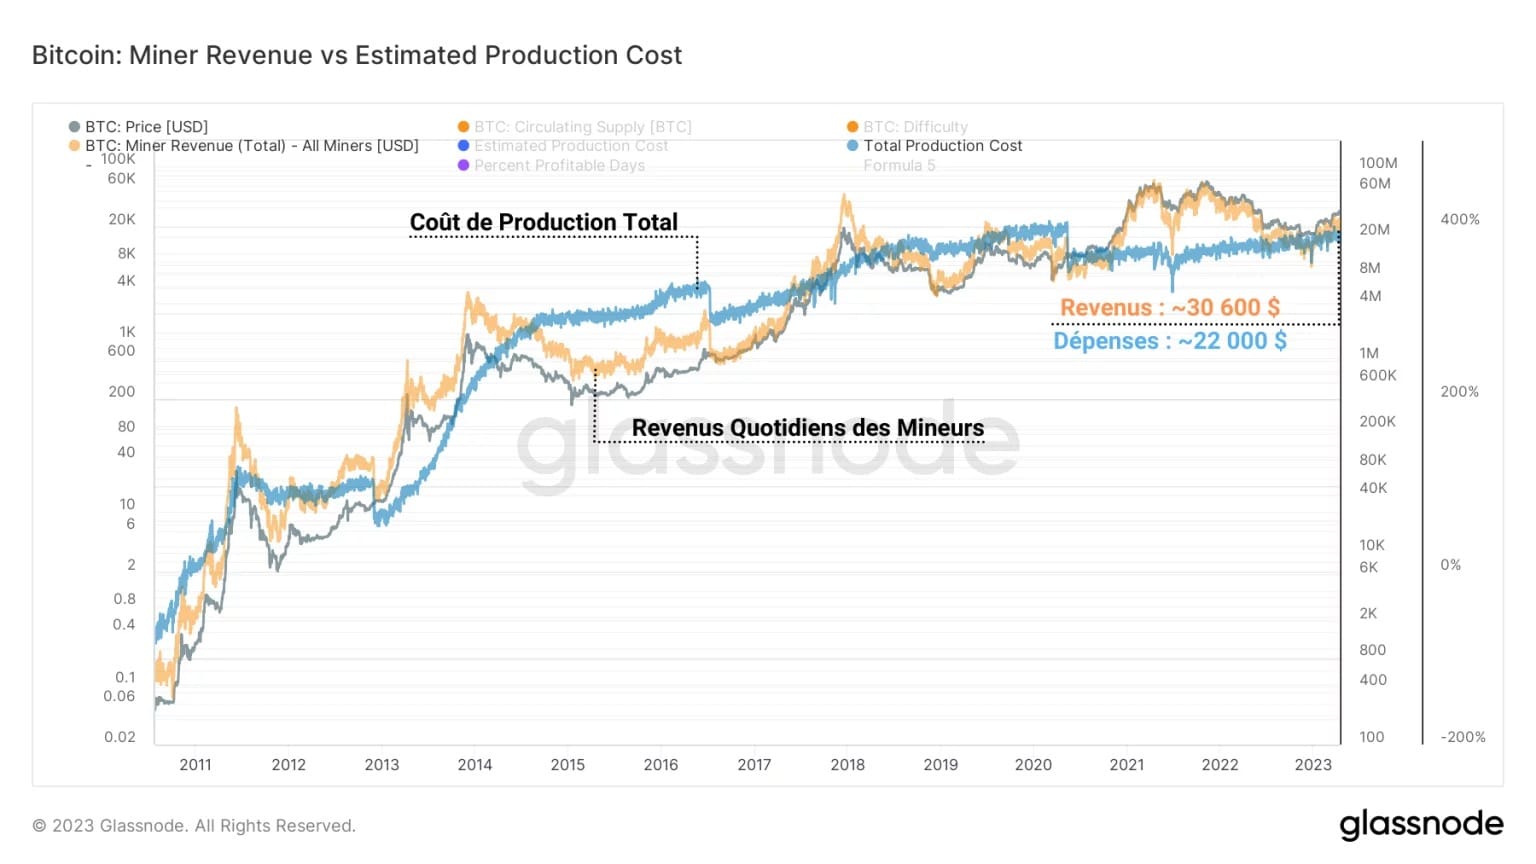 Figure 3: Total Production Cost and Daily Income of Miners